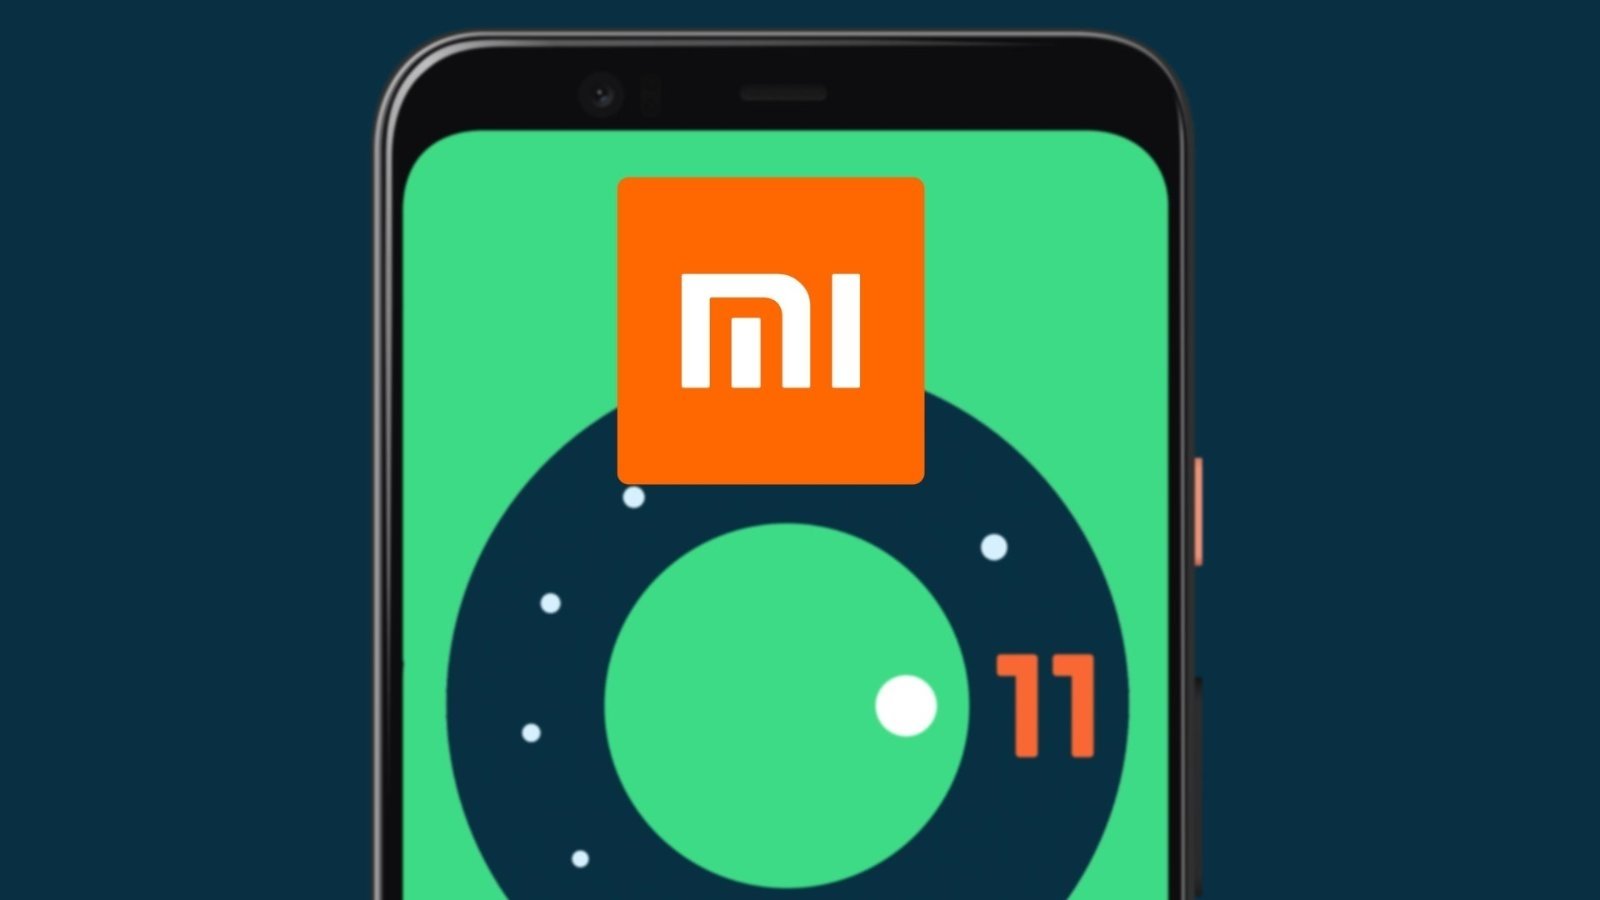 android 11 xiaomi